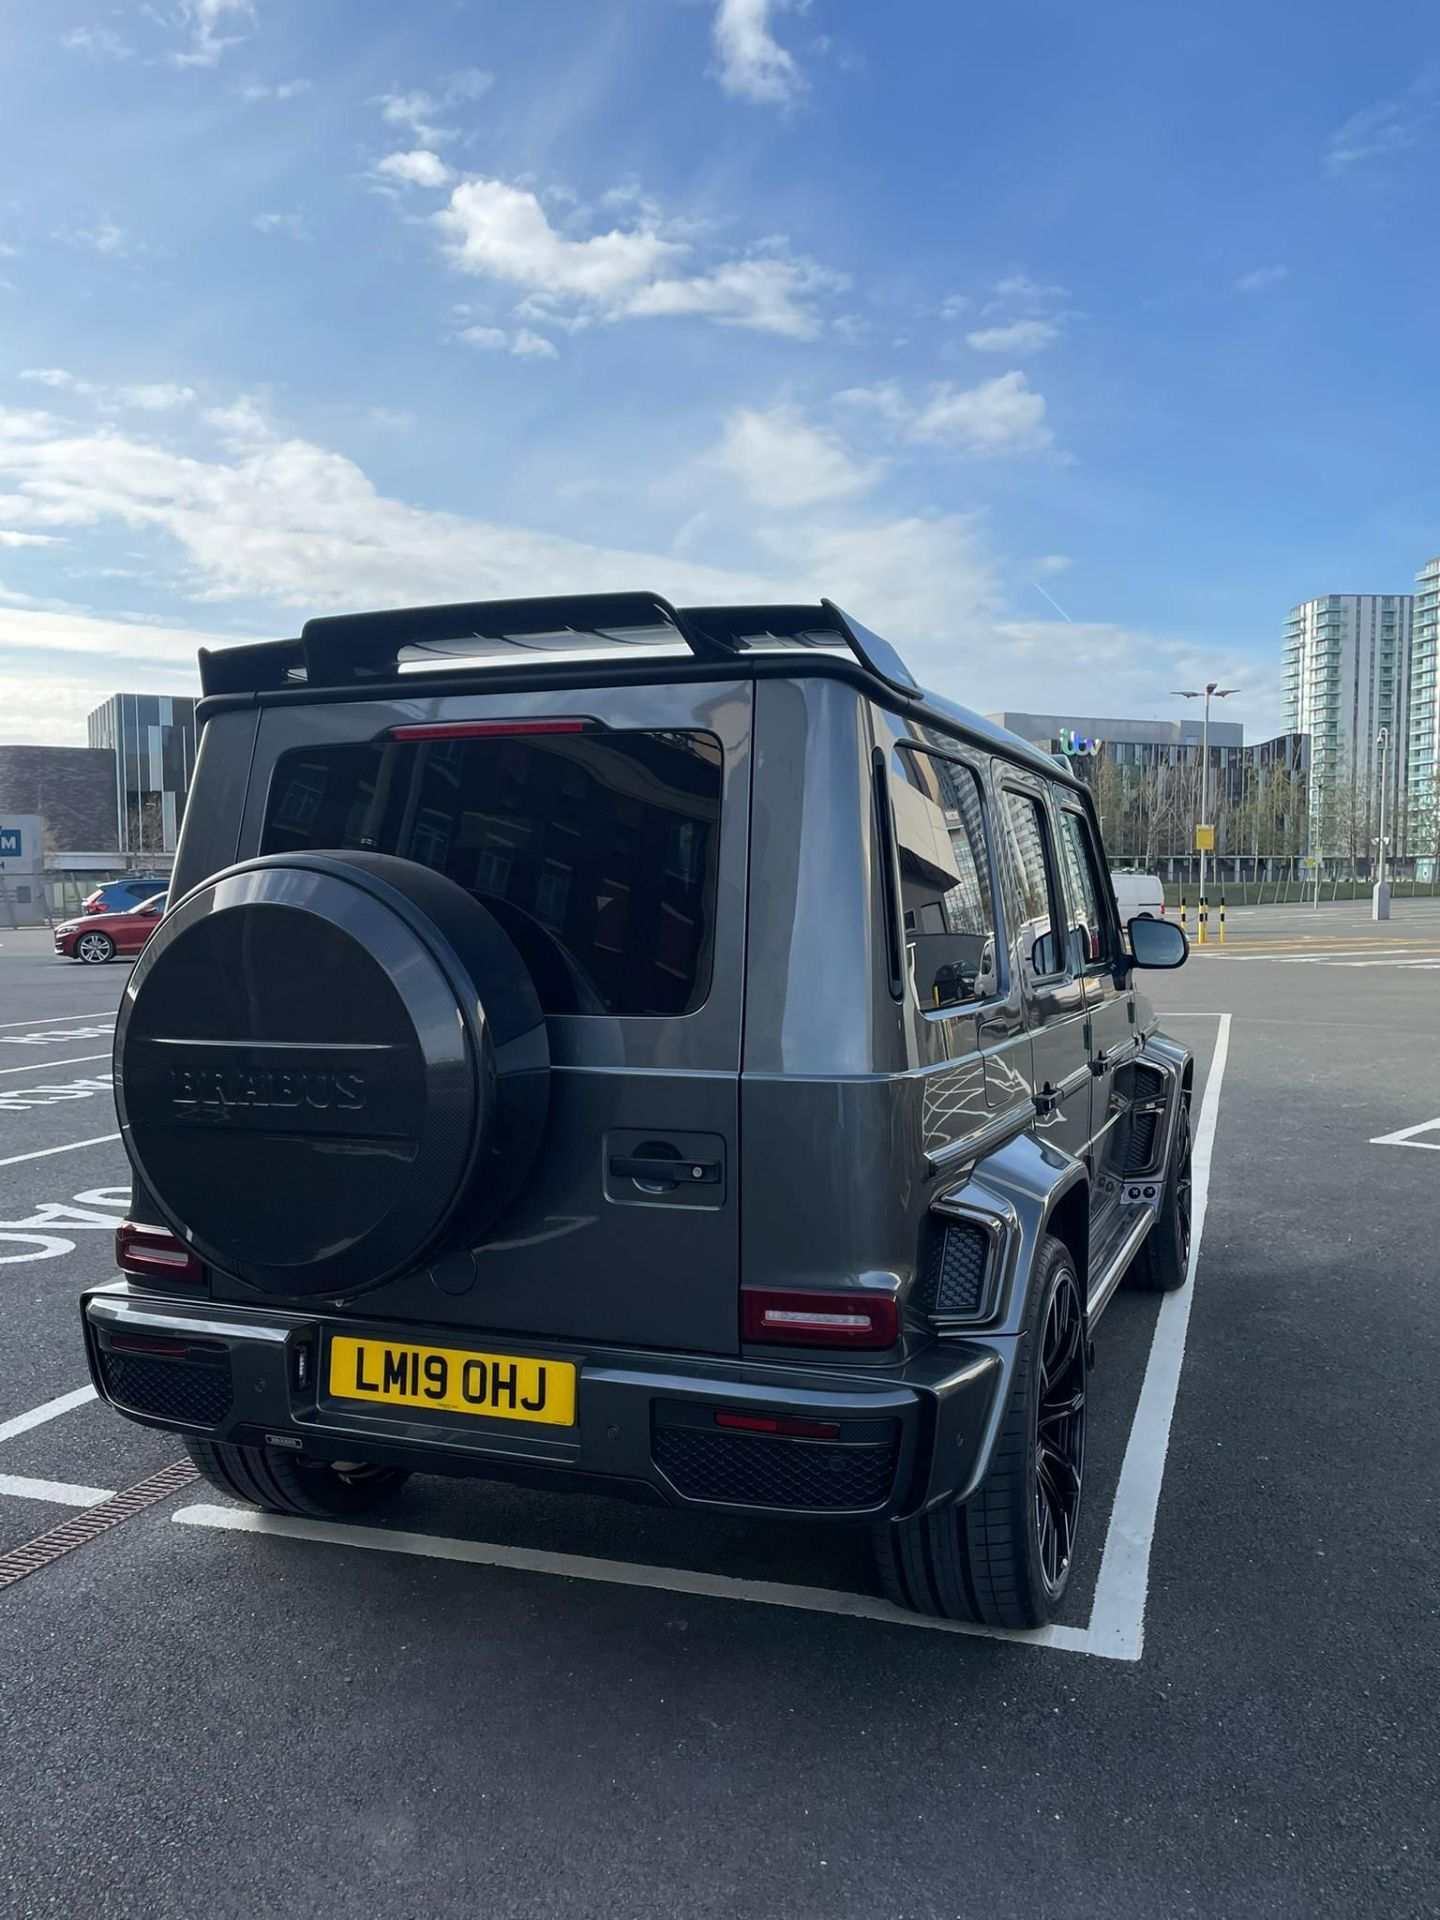 MERCEDES G63 BRABUS WIDE-STAR 800 STYLING GREY WITH BLACK LEATHER INTERIOR - Image 11 of 23